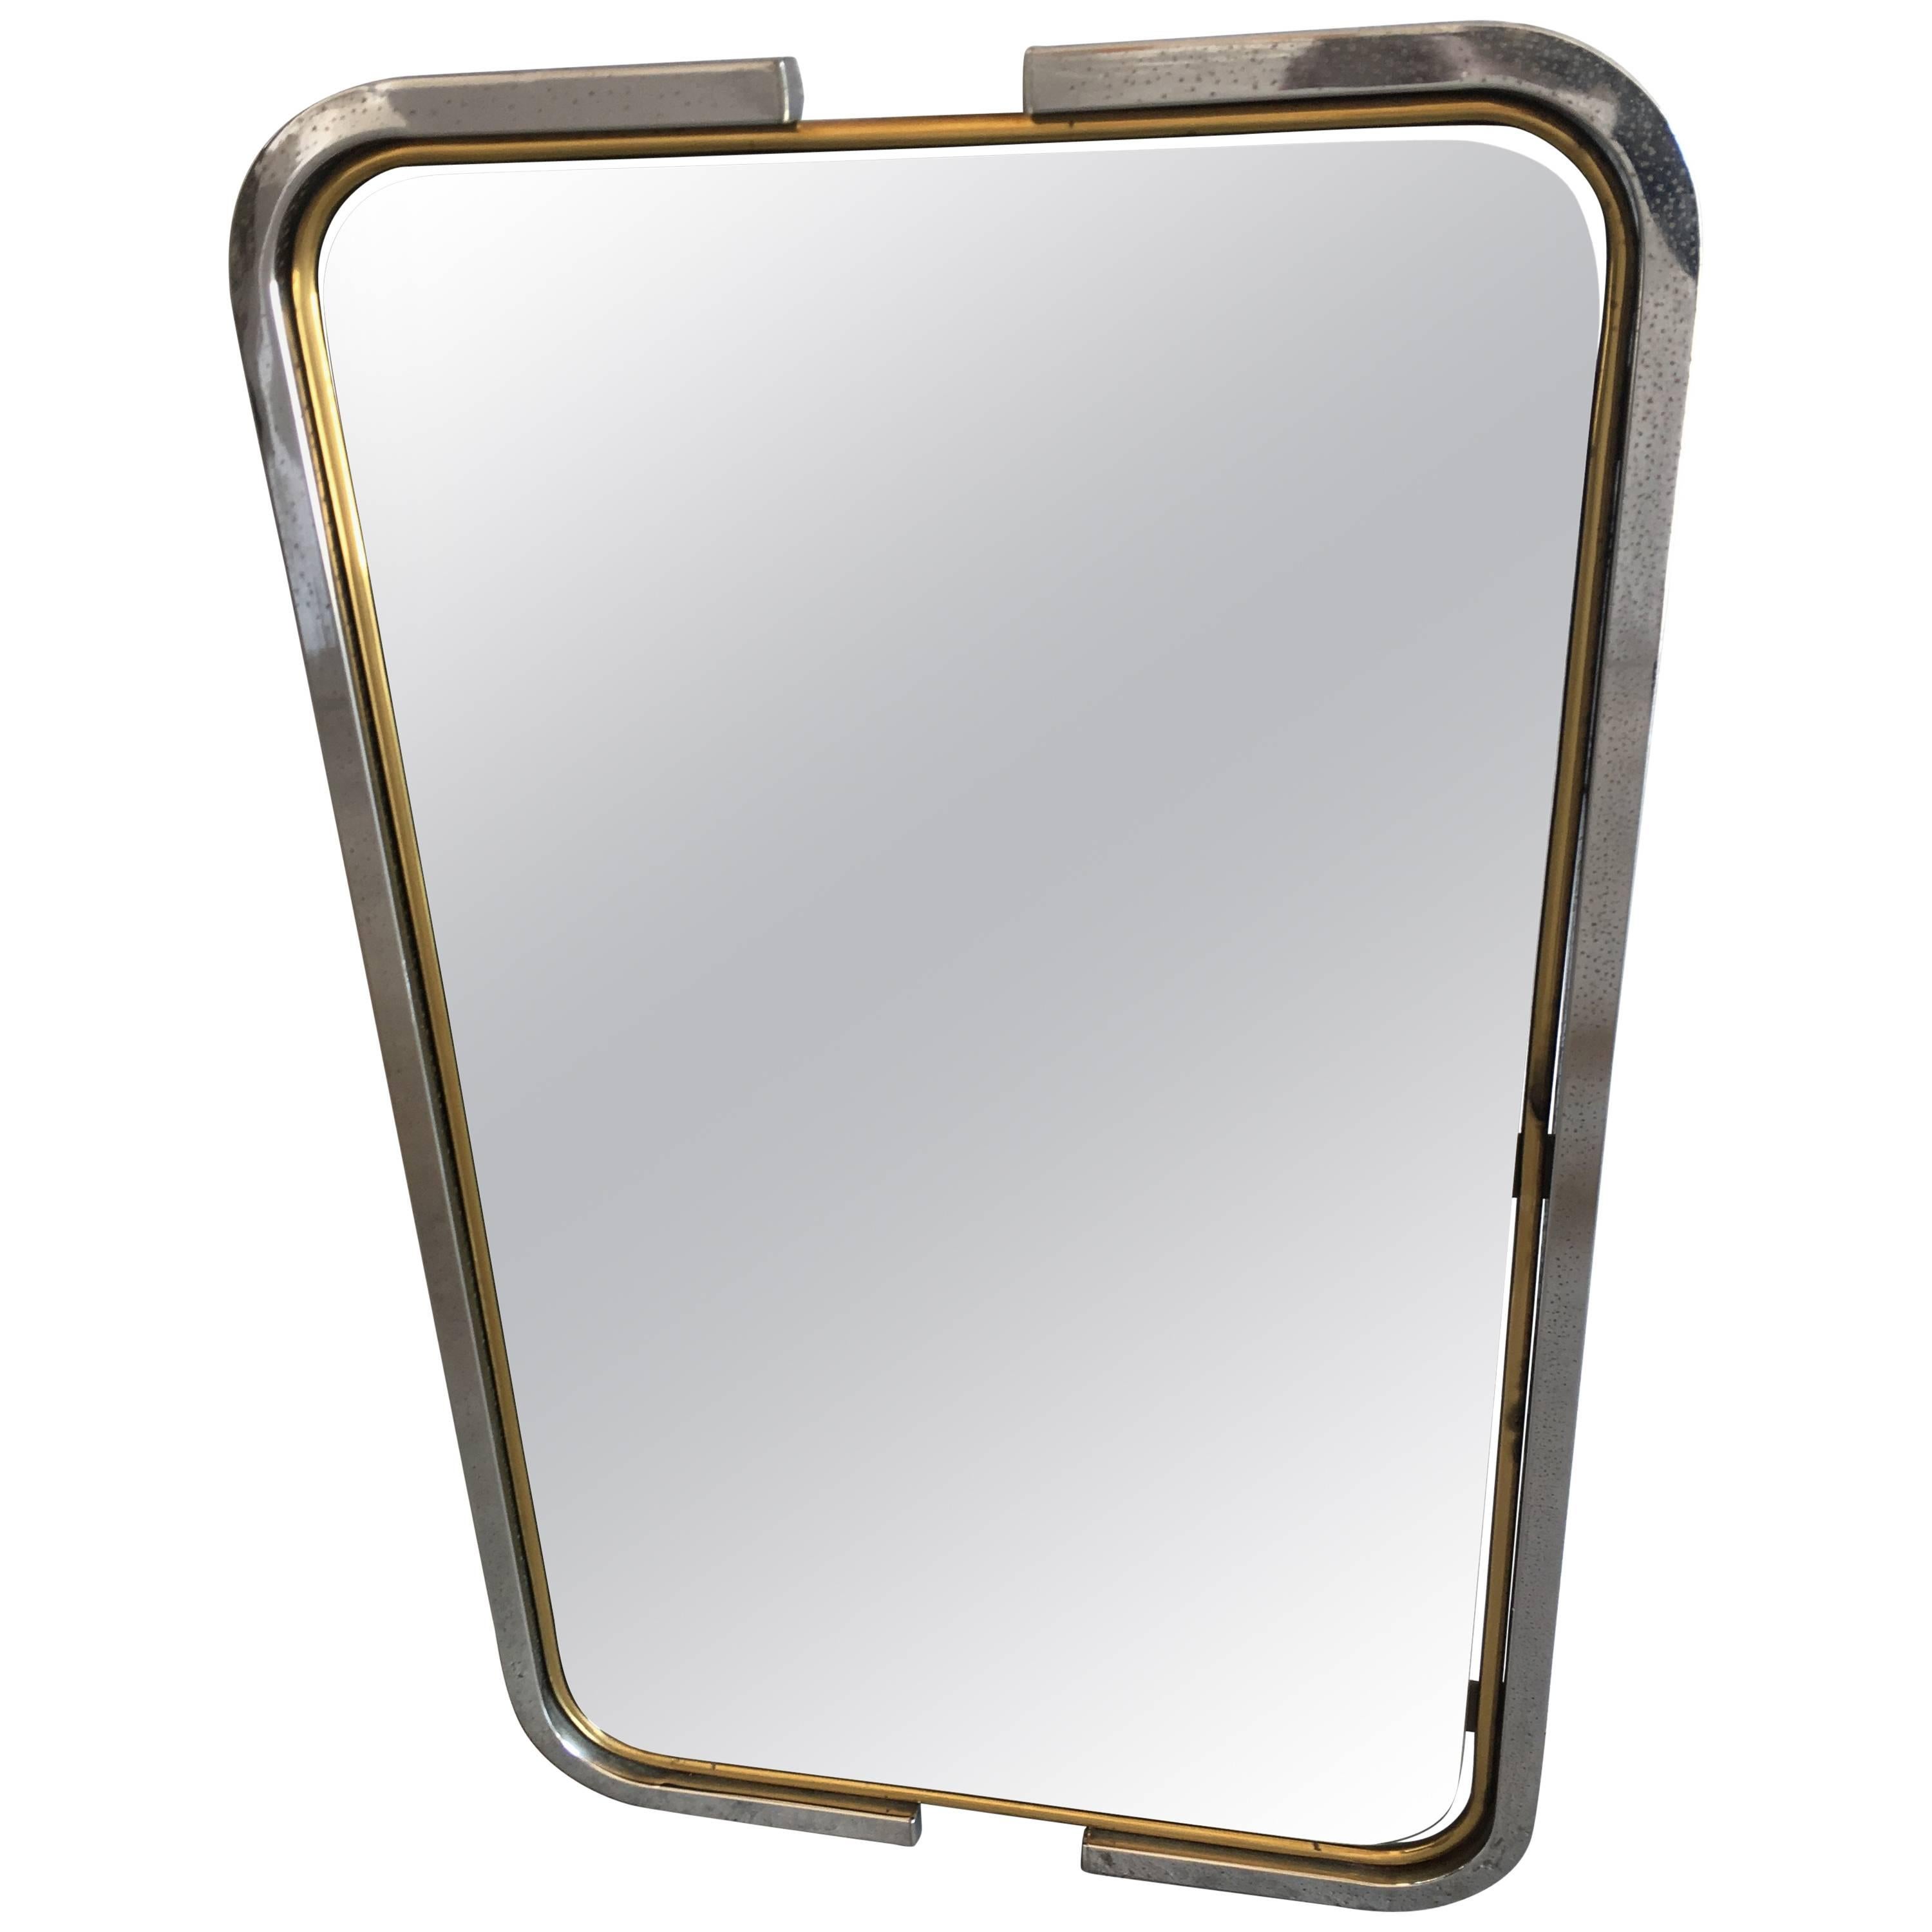 Italian Mid-Century Modern Mirror with Chrome and Brass Frame from 1970s